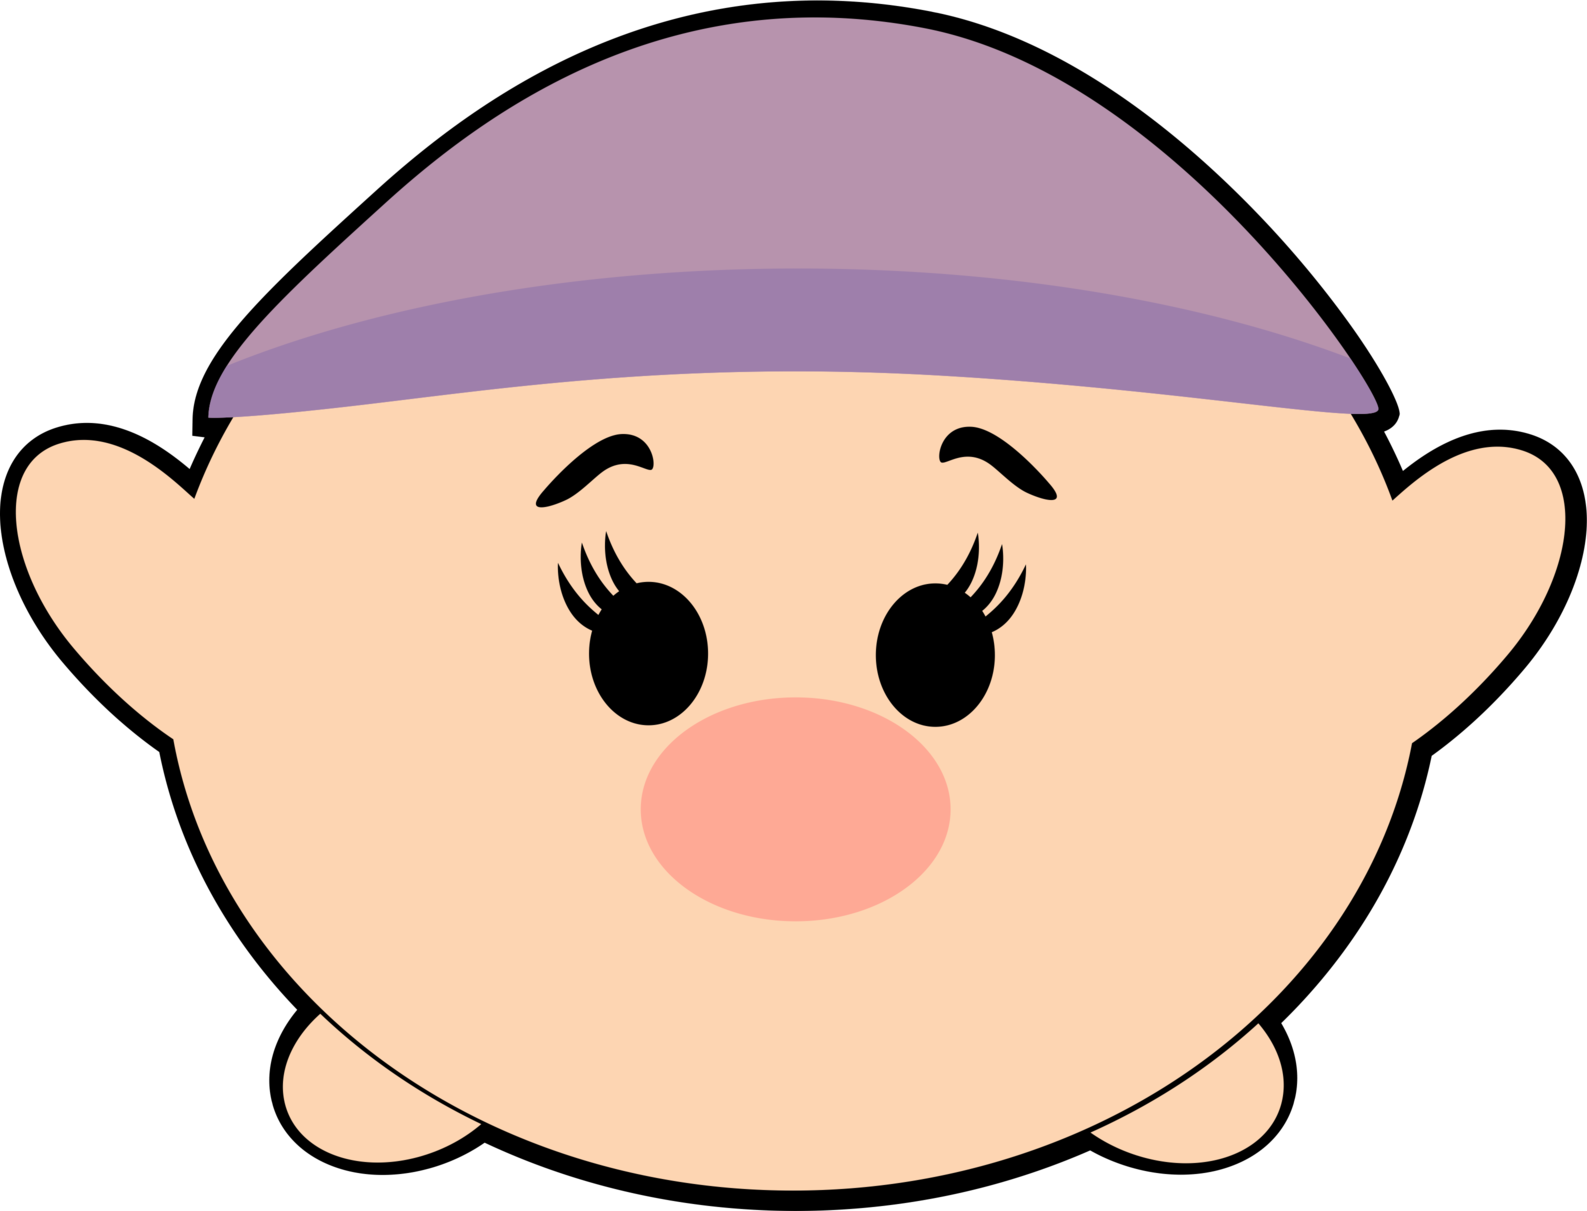 Purple Hatted Tsum Tsum Character PNG image